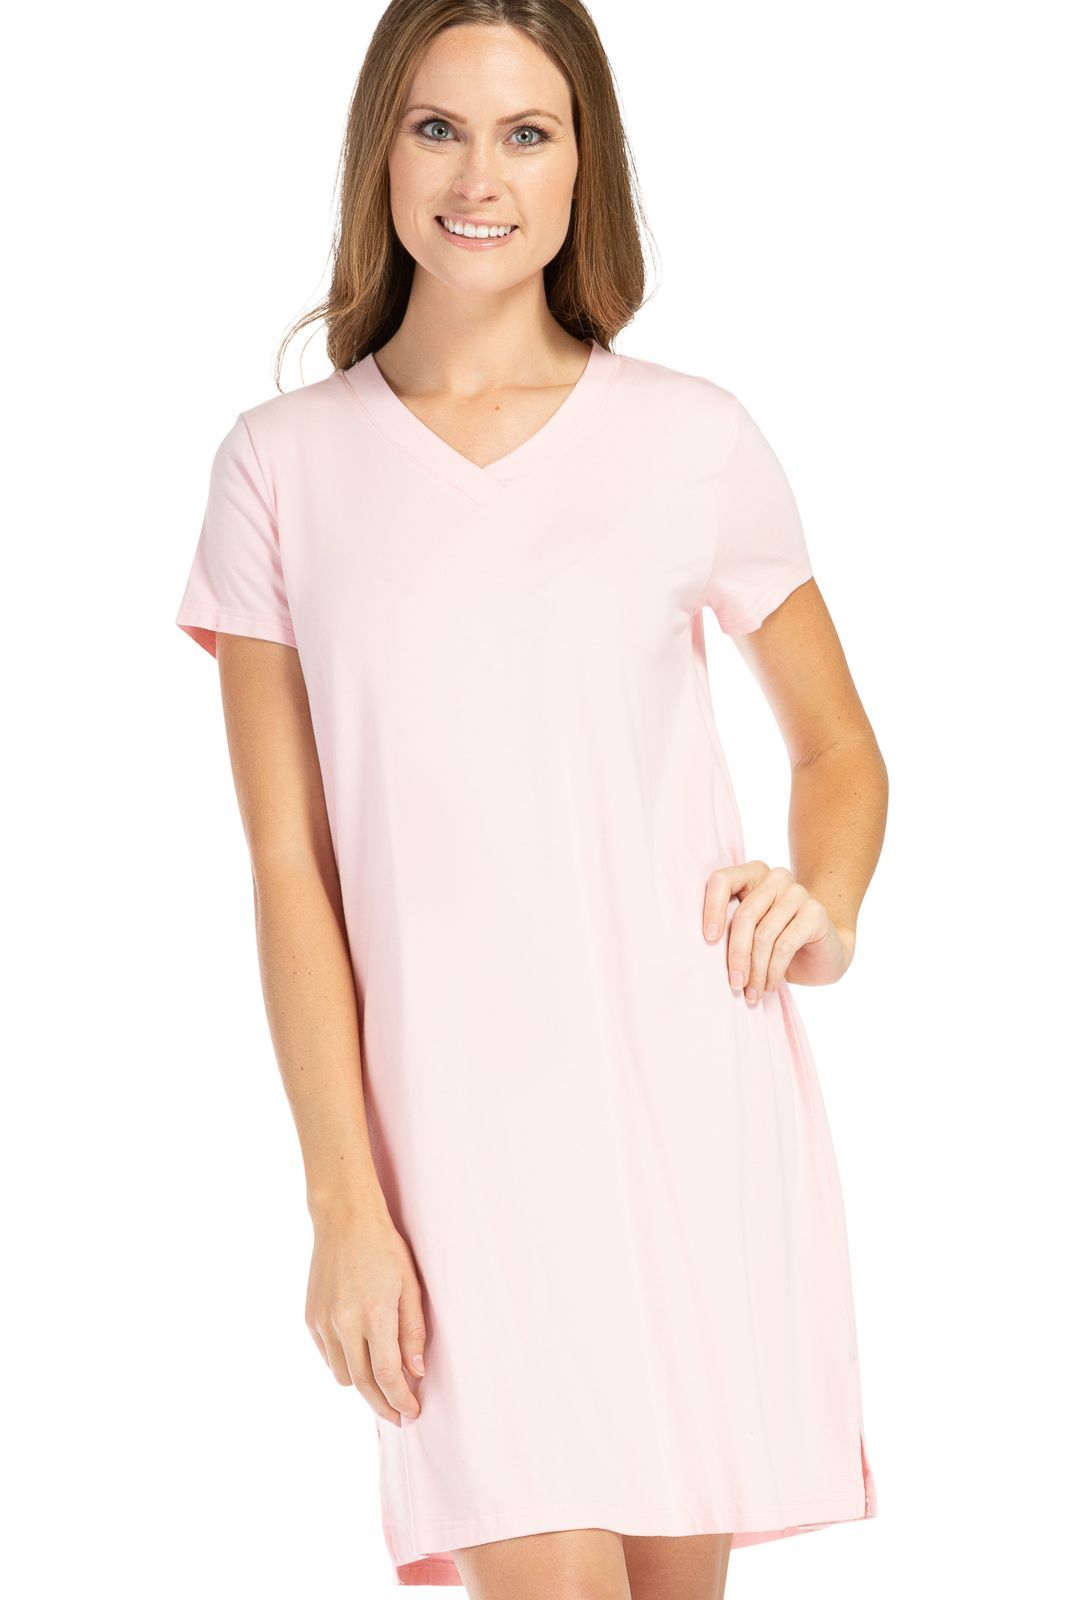 Shop for Women's Nightgowns and Sleep Shirts